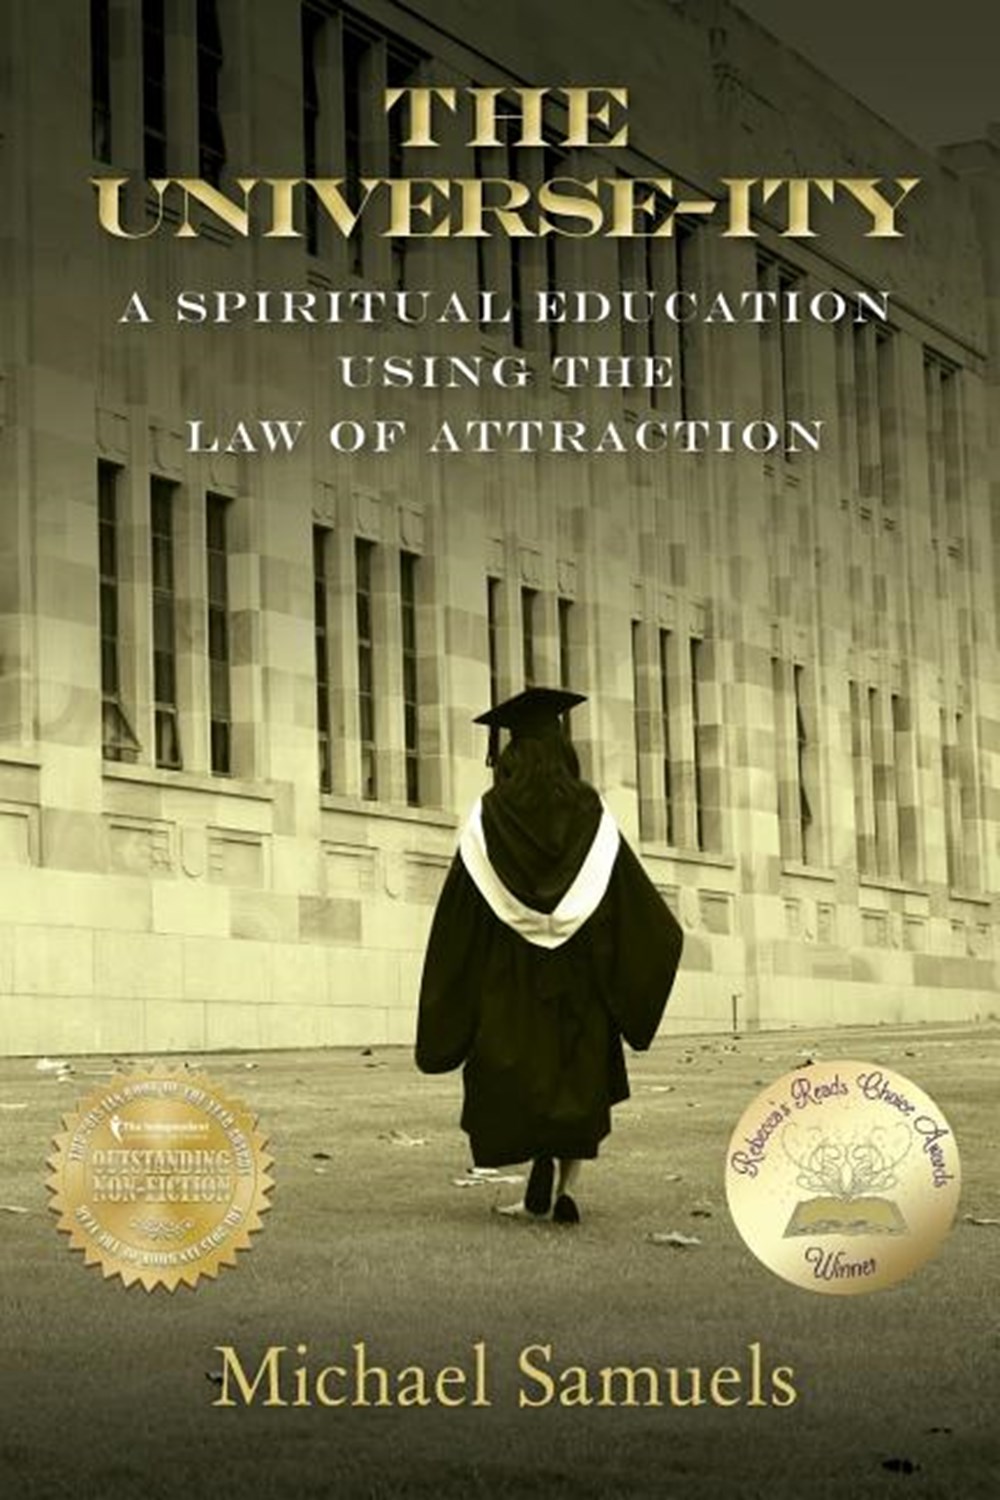 Universe-ity: A Spiritual Education using the Law of Attraction